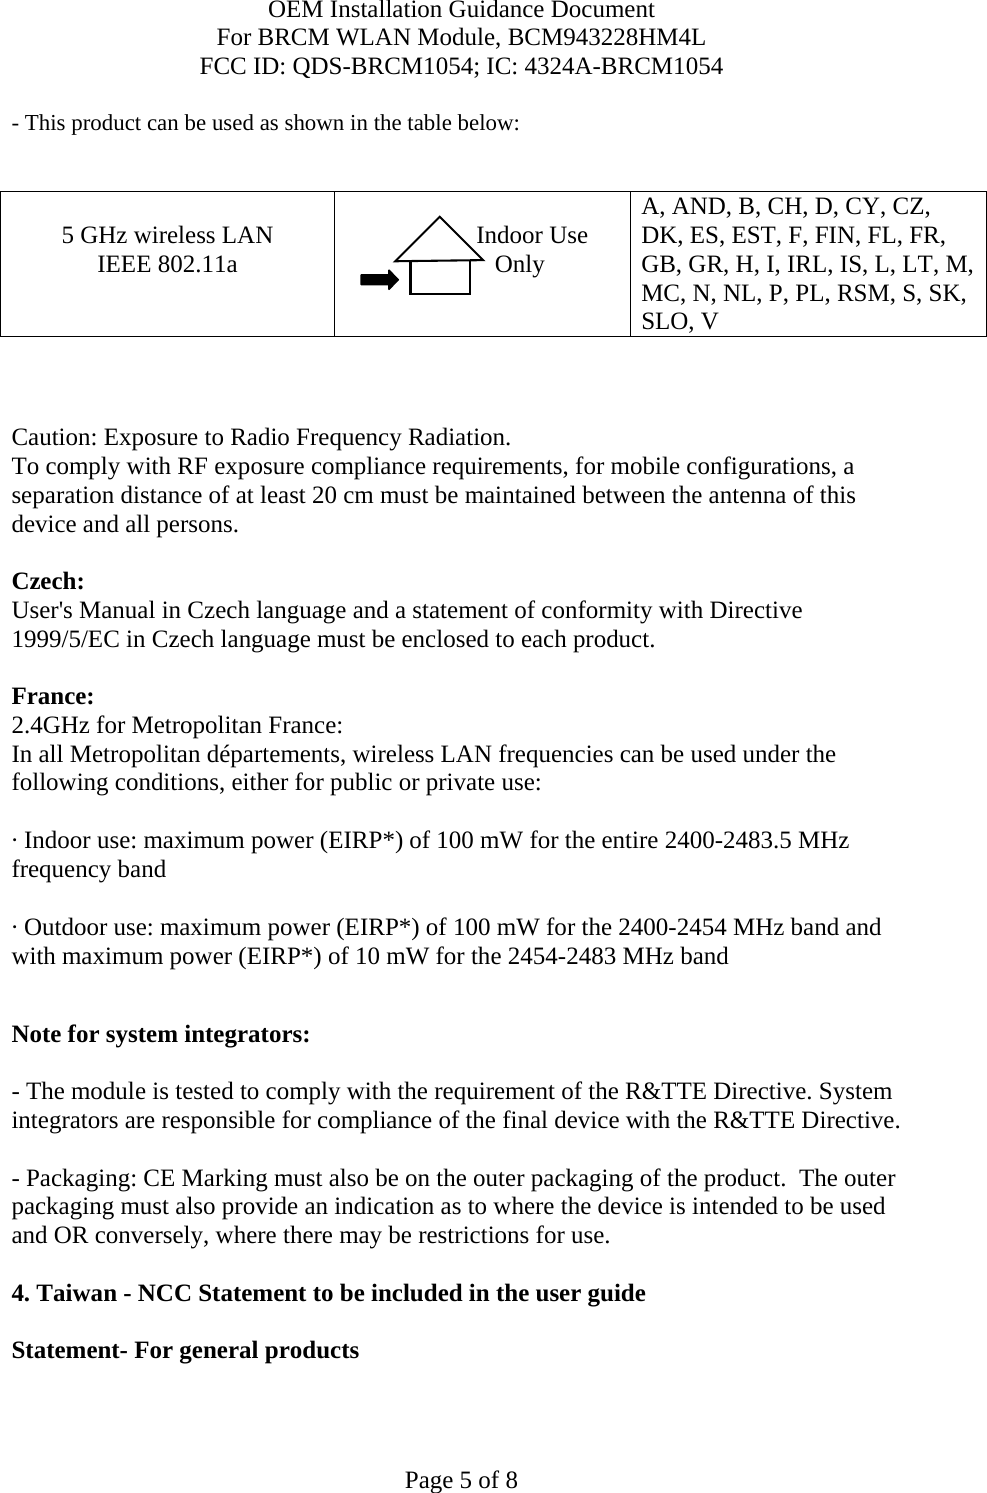 OEM Installation Guidance Document For BRCM WLAN Module, BCM943228HM4L FCC ID: QDS-BRCM1054; IC: 4324A-BRCM1054  Page 5 of 8 - This product can be used as shown in the table below:   5 GHz wireless LAN IEEE 802.11a                  Indoor Use             Only  A, AND, B, CH, D, CY, CZ, DK, ES, EST, F, FIN, FL, FR, GB, GR, H, I, IRL, IS, L, LT, M, MC, N, NL, P, PL, RSM, S, SK, SLO, V    Caution: Exposure to Radio Frequency Radiation.   To comply with RF exposure compliance requirements, for mobile configurations, a separation distance of at least 20 cm must be maintained between the antenna of this device and all persons.  Czech:  User&apos;s Manual in Czech language and a statement of conformity with Directive 1999/5/EC in Czech language must be enclosed to each product.   France: 2.4GHz for Metropolitan France:   In all Metropolitan départements, wireless LAN frequencies can be used under the following conditions, either for public or private use:  · Indoor use: maximum power (EIRP*) of 100 mW for the entire 2400-2483.5 MHz frequency band · Outdoor use: maximum power (EIRP*) of 100 mW for the 2400-2454 MHz band and with maximum power (EIRP*) of 10 mW for the 2454-2483 MHz band  Note for system integrators:   - The module is tested to comply with the requirement of the R&amp;TTE Directive. System integrators are responsible for compliance of the final device with the R&amp;TTE Directive.   - Packaging: CE Marking must also be on the outer packaging of the product.  The outer packaging must also provide an indication as to where the device is intended to be used and OR conversely, where there may be restrictions for use.   4. Taiwan - NCC Statement to be included in the user guide  Statement- For general products  